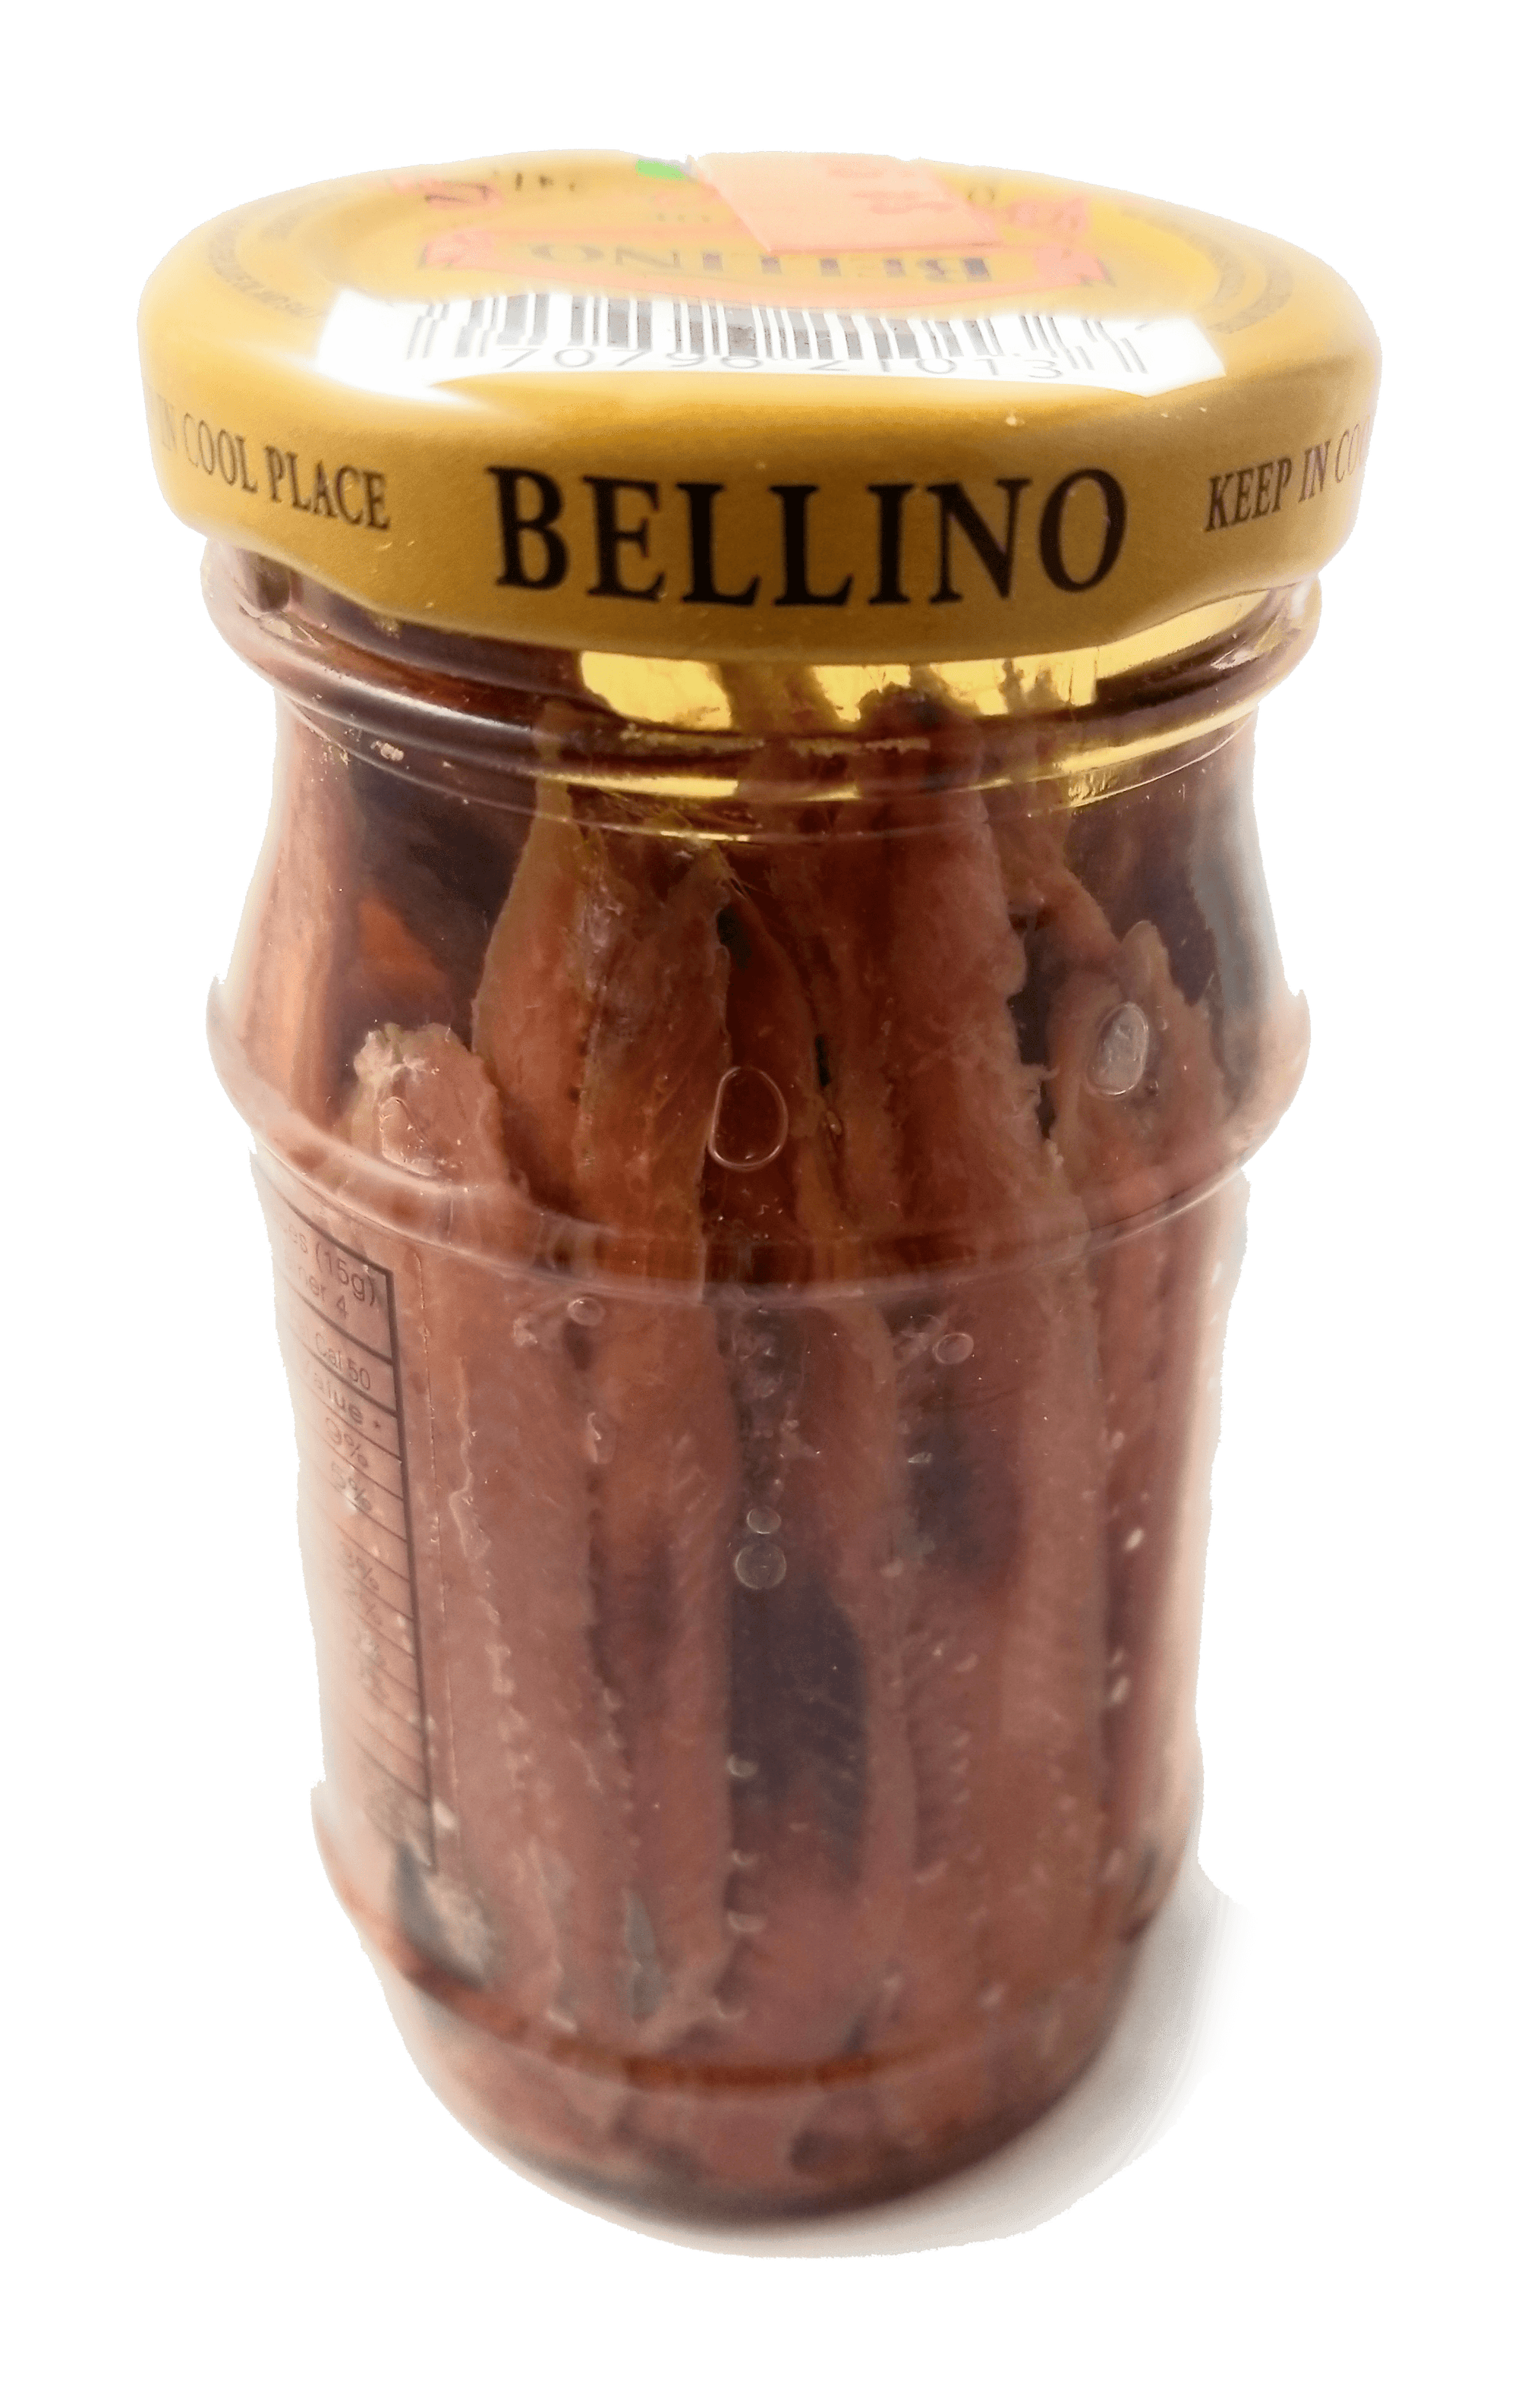 Sea Food - Bellino Fillet Of Anchovy, 4.25-Ounce Glass Jars - (Pack Of 4)